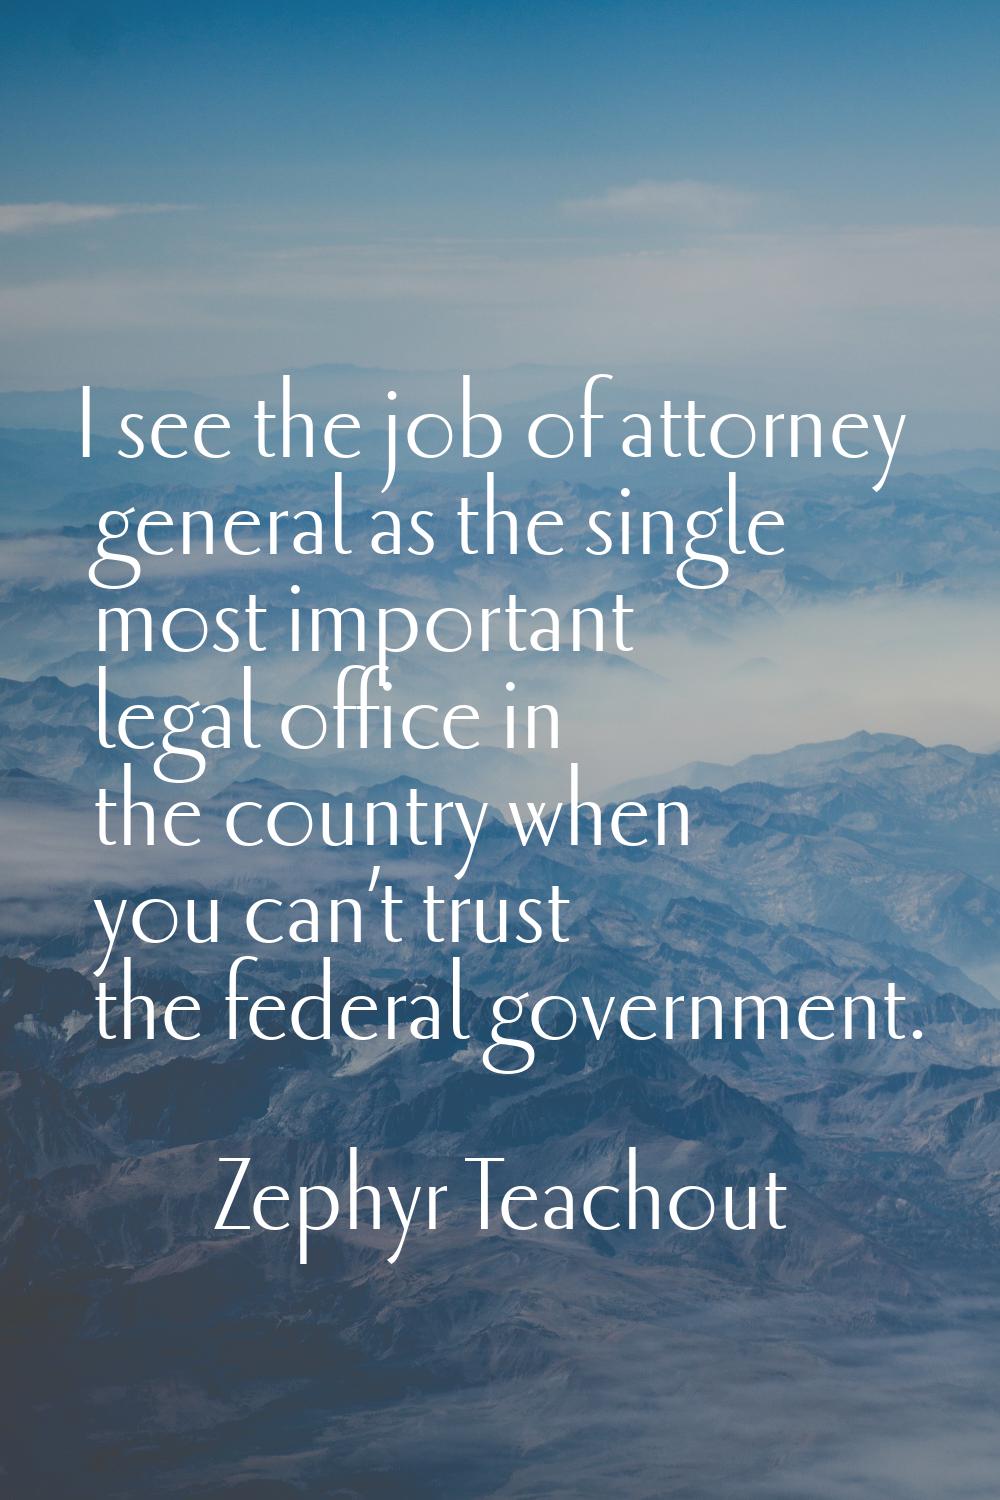 I see the job of attorney general as the single most important legal office in the country when you